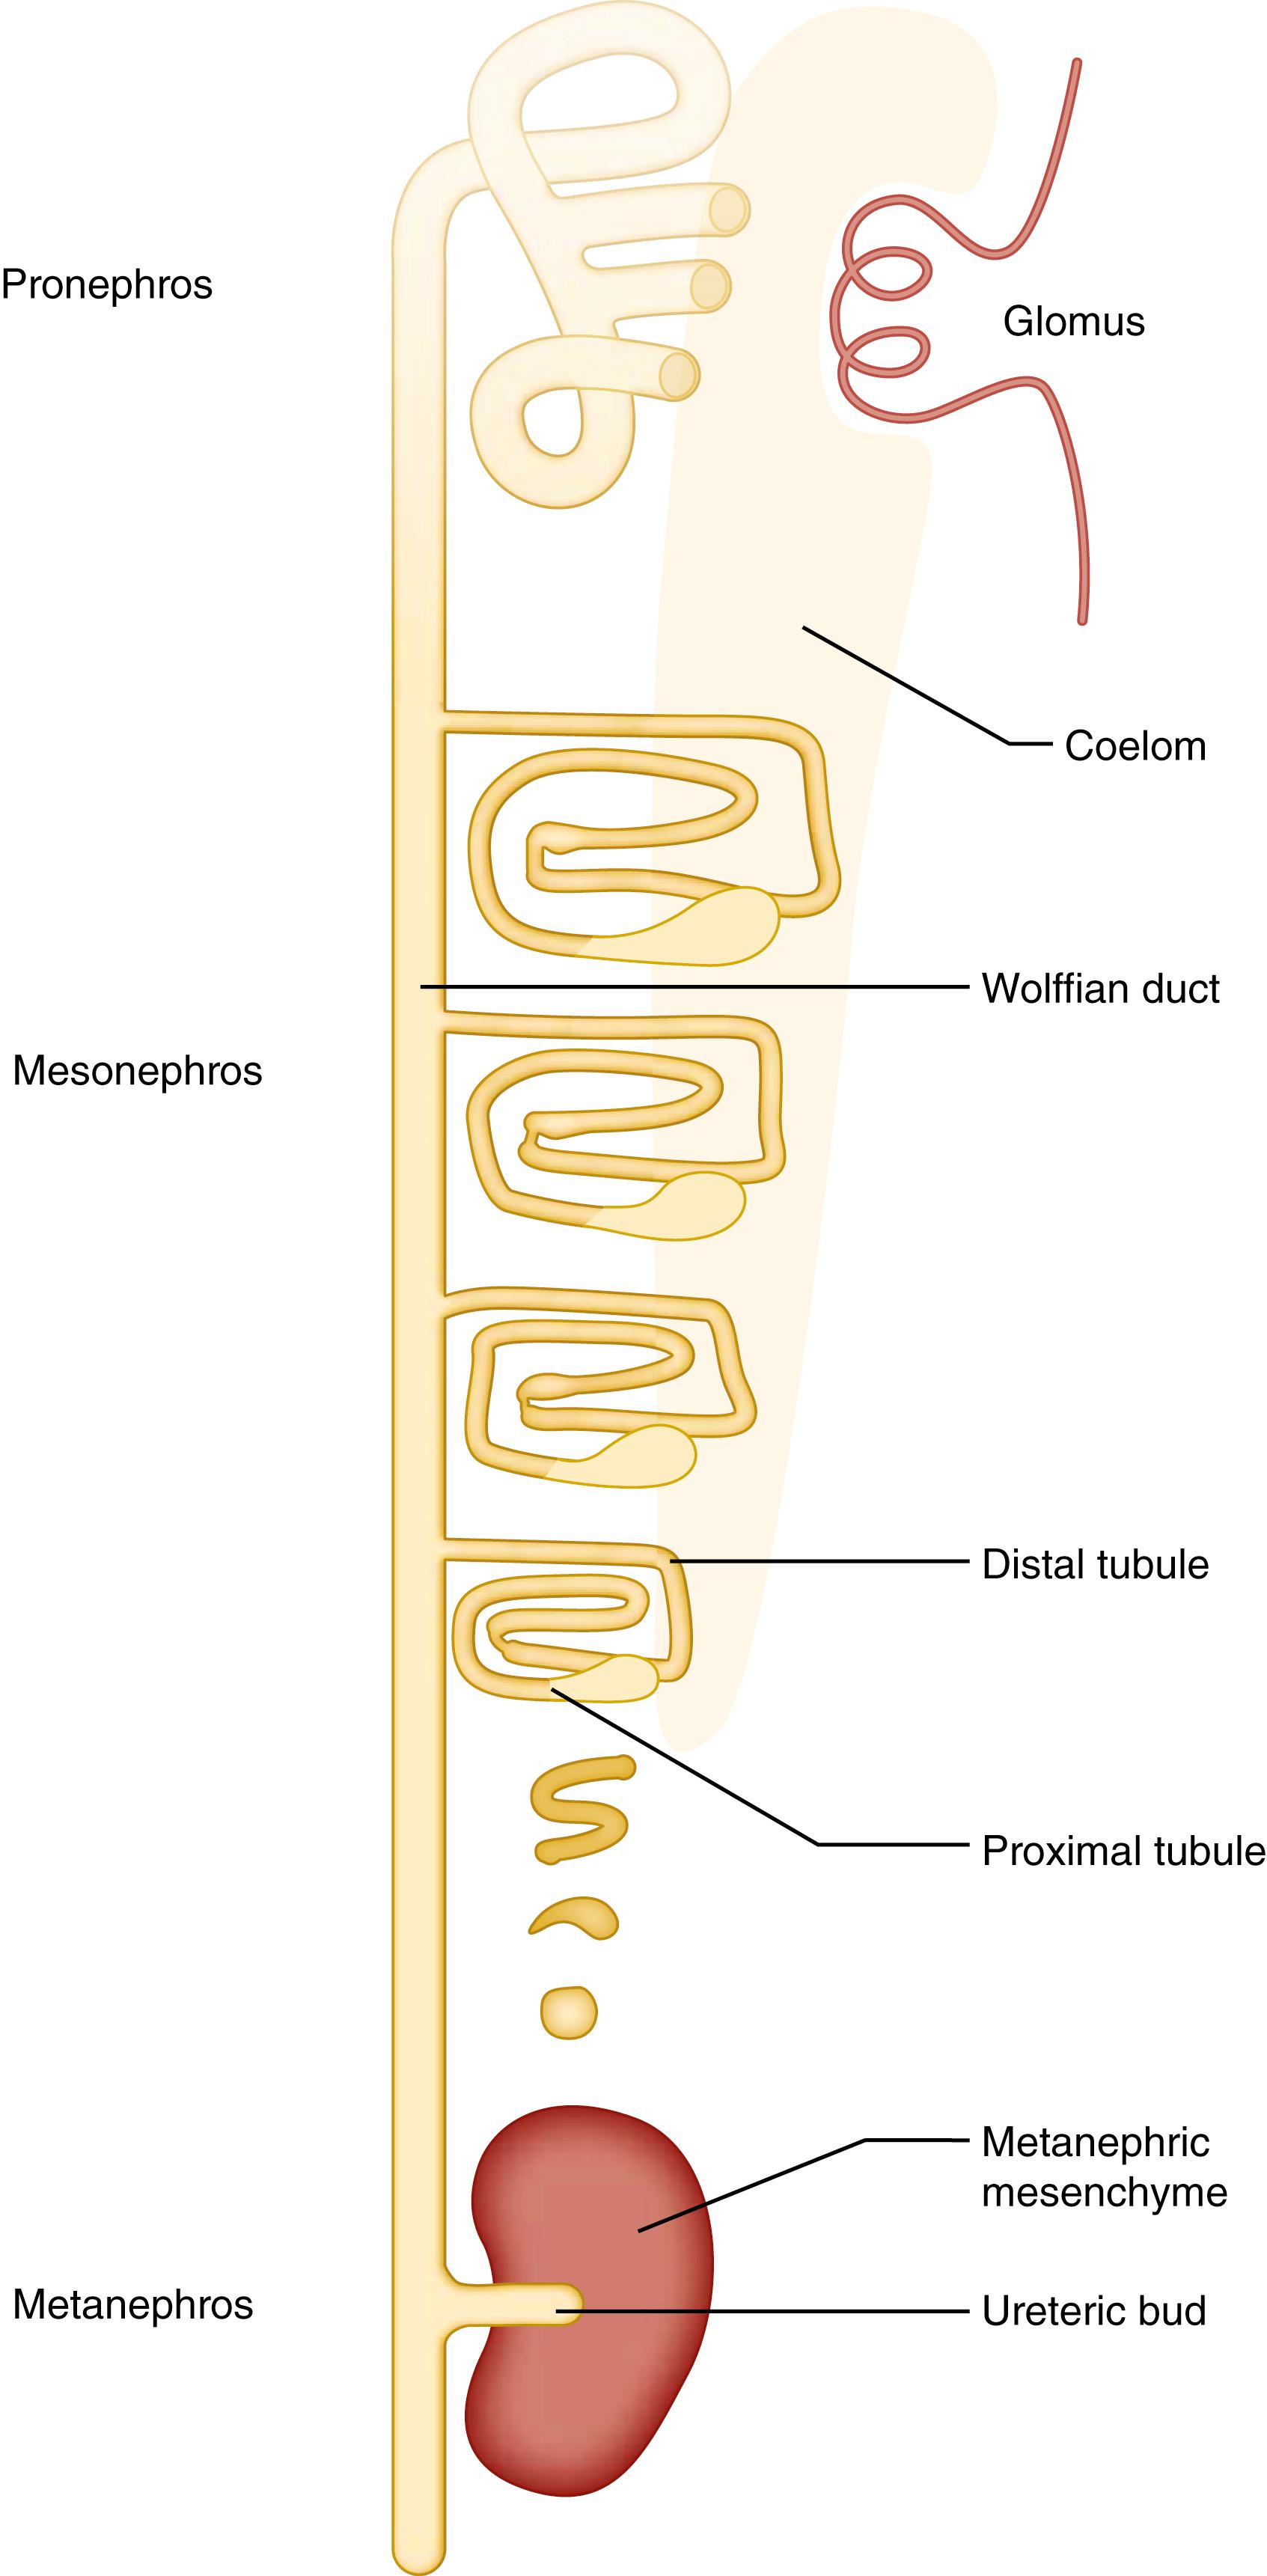 Fig. 93.1, Schematic representation showing development of the pronephros, mesonephros, and metanephros. The pronephros, composed of a single glomus, projects into the nephrocoel but filters directly into the coelom and is depicted as having already degenerated. The mesonephros consists of multiple nephrons that develop in a cranial to caudal fashion such that the most caudal structures are still in the process of developing into complete nephrons that will attach to the wolffian duct. The metanephros at this stage comprises the ureteric bud, which has entered the metanephric mesenchyme but has not yet branched.